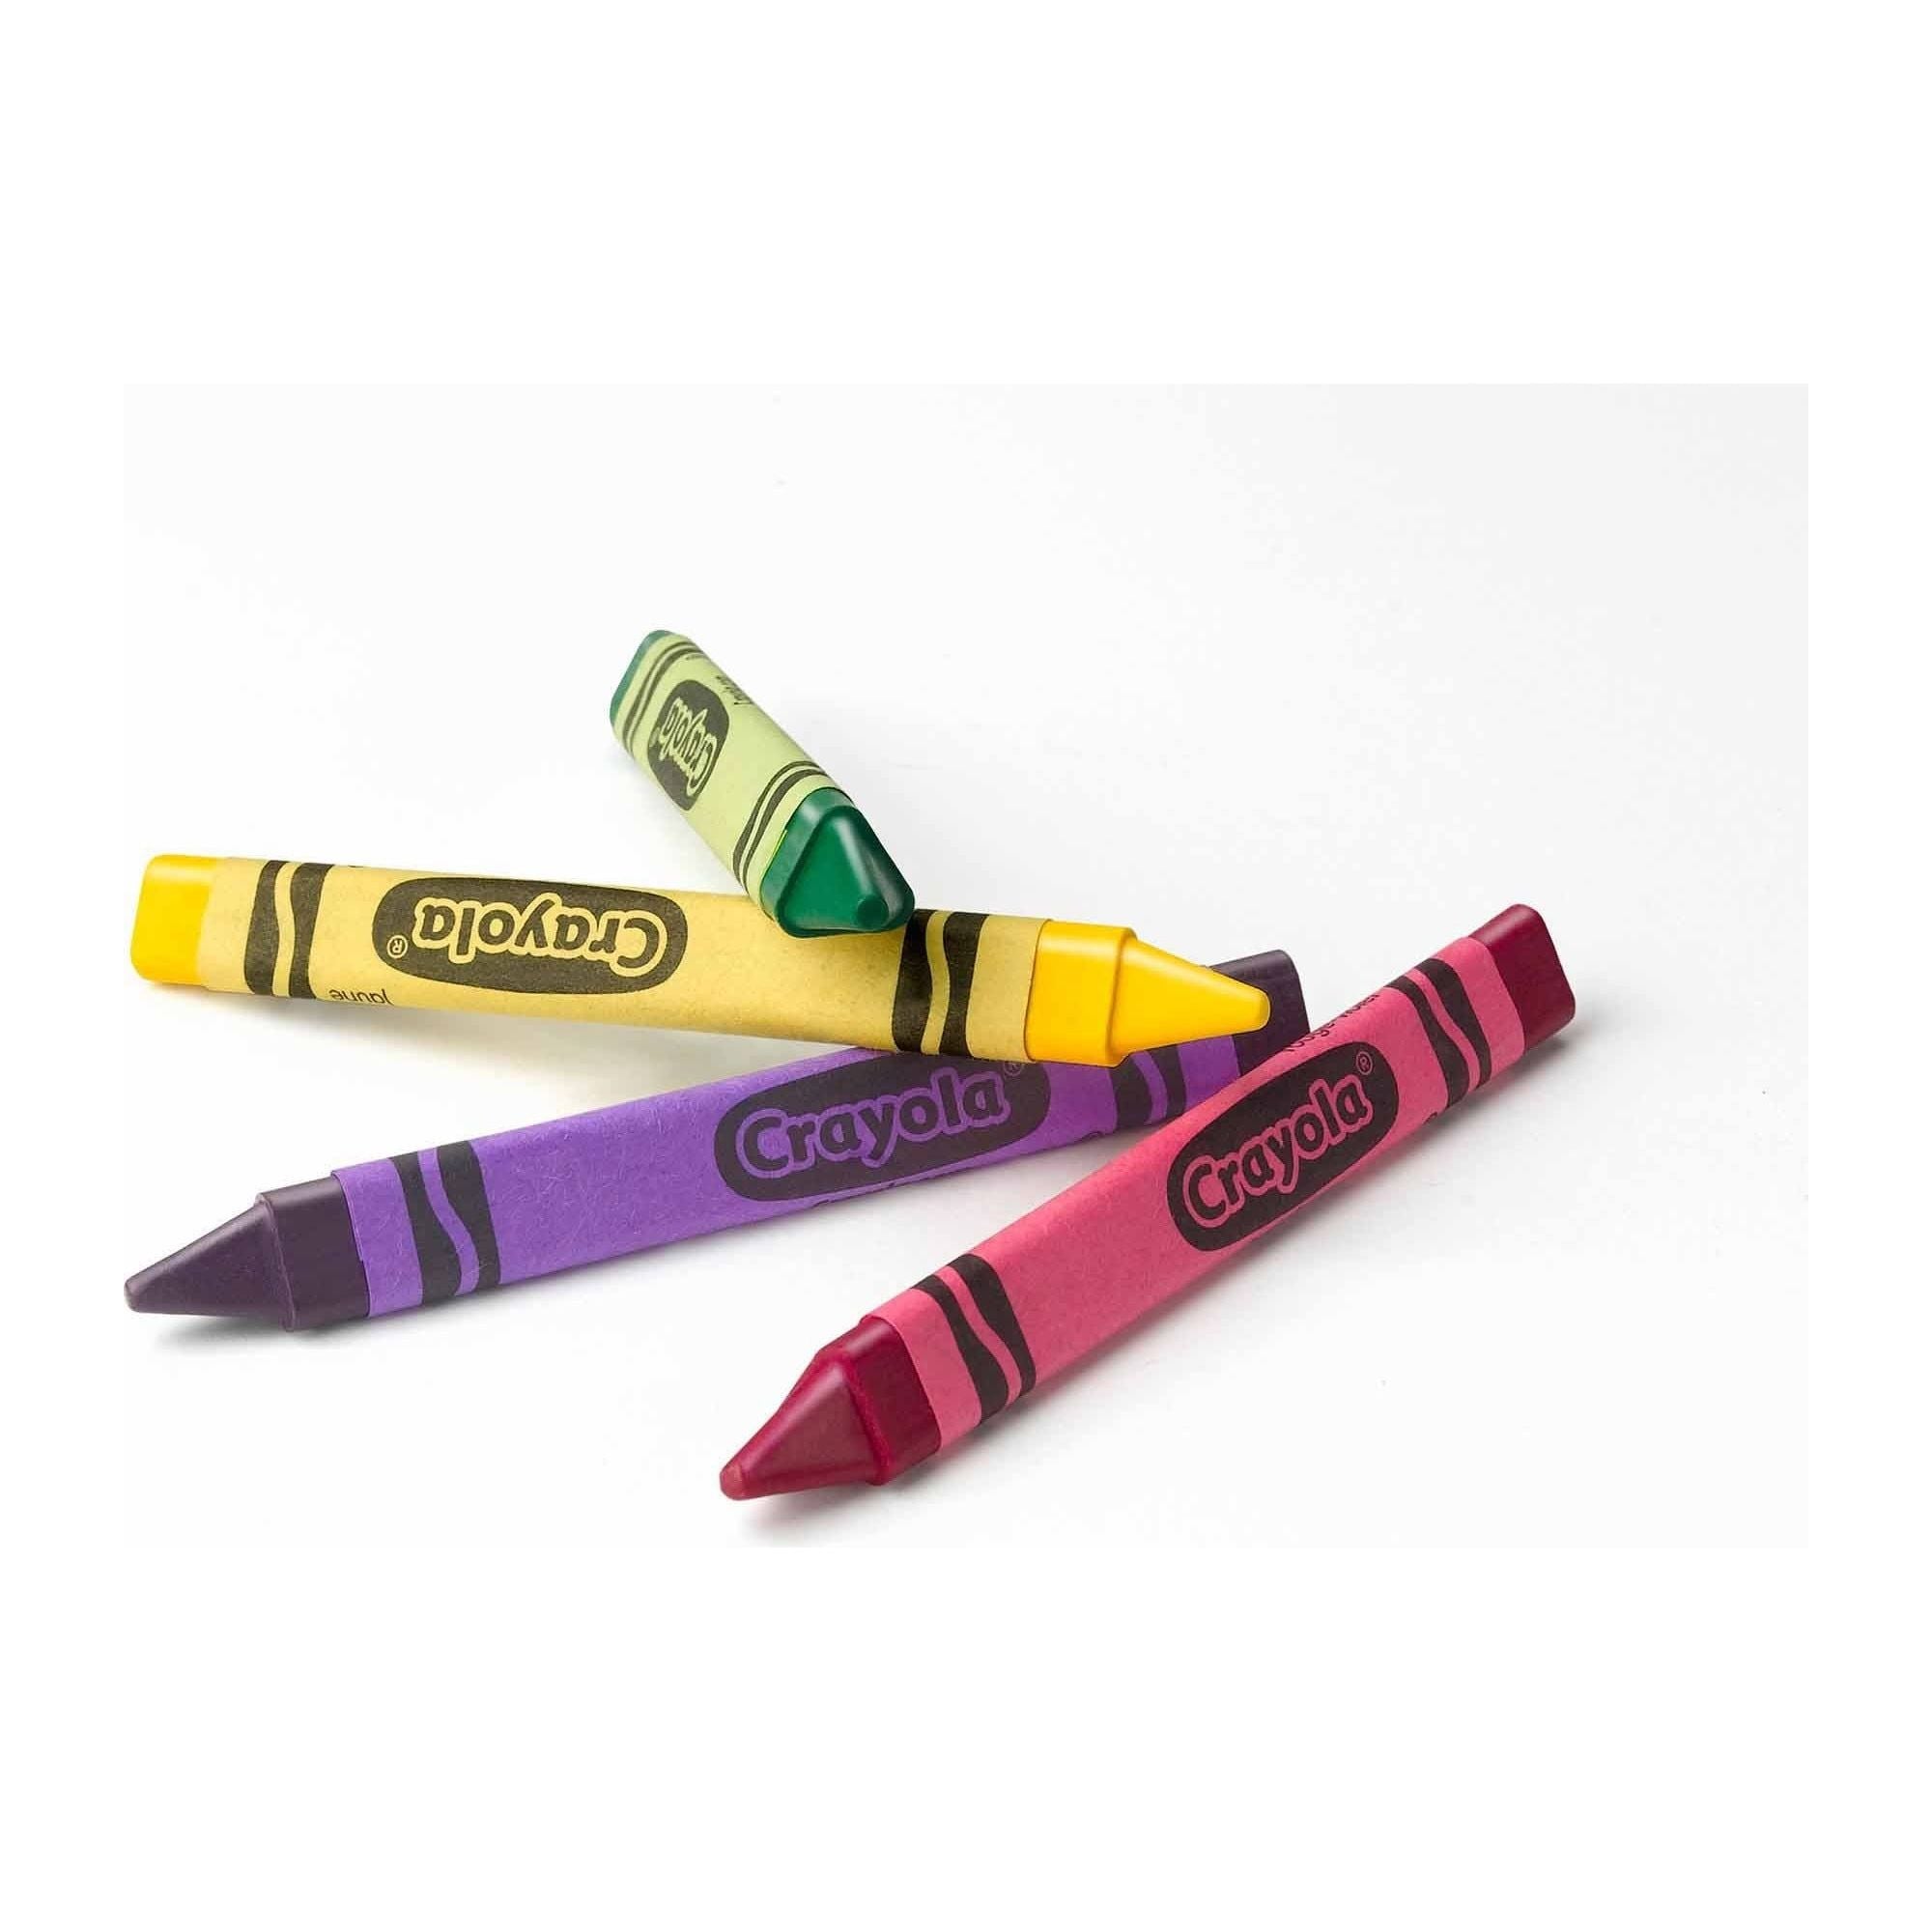 3 Packs: 3 ct. (9) My First Crayola® Washable Palm-Grasp Crayons